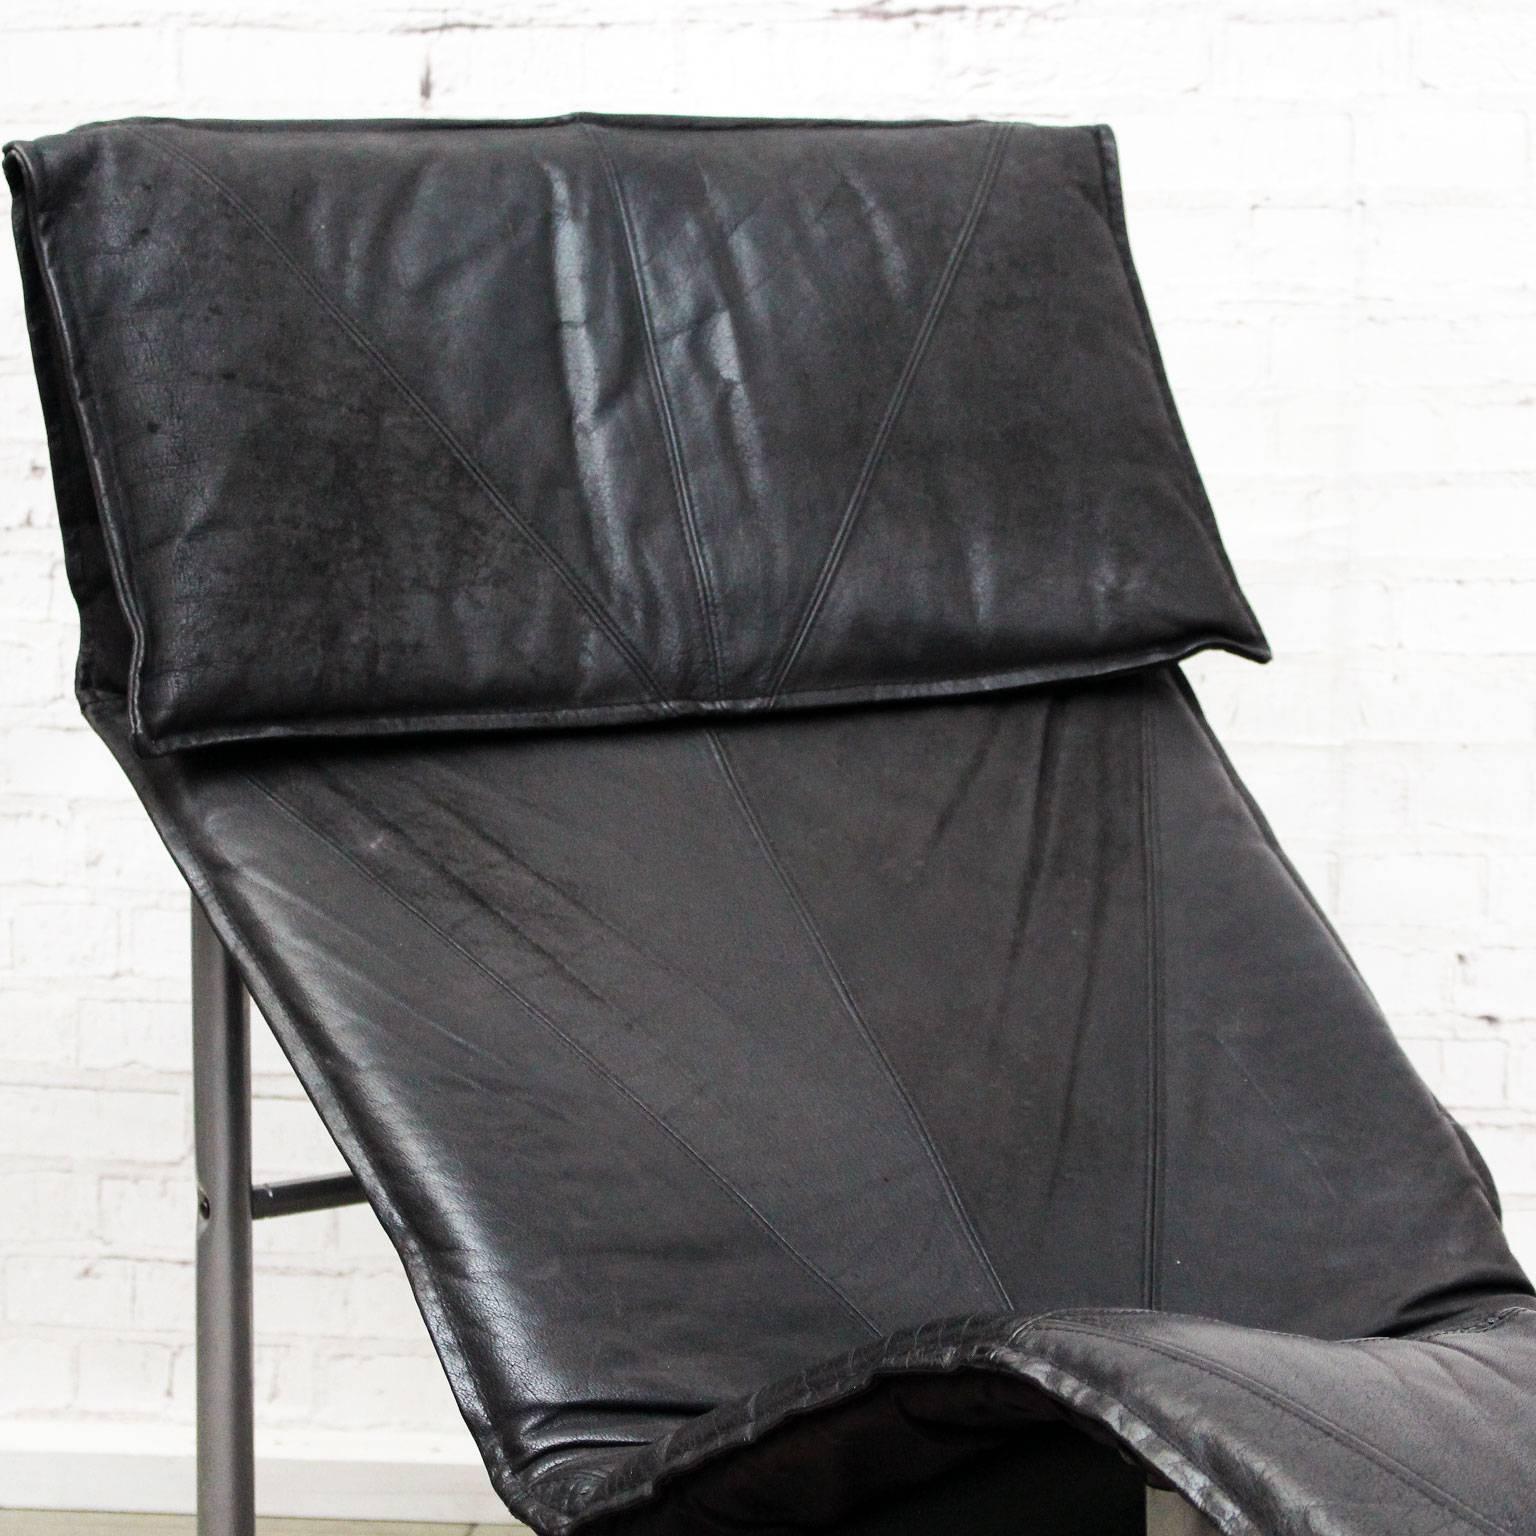 Black Leather Chaise Longue by Tord Bjorklund In Excellent Condition For Sale In Kent, GB